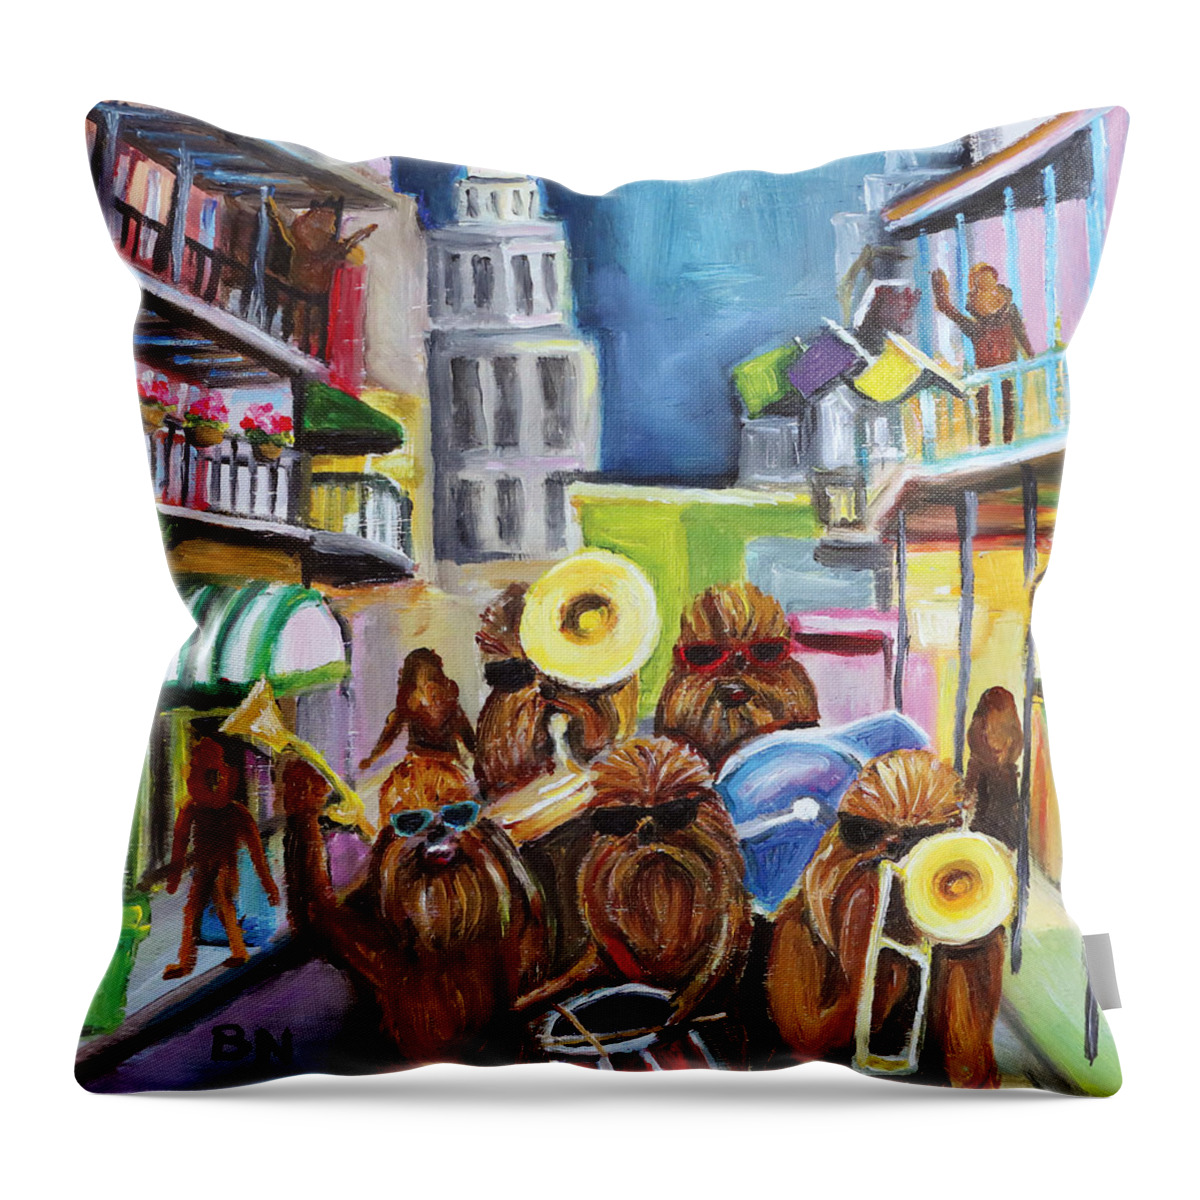 Nolaween Throw Pillow featuring the painting Nolaween by Barbara Noel